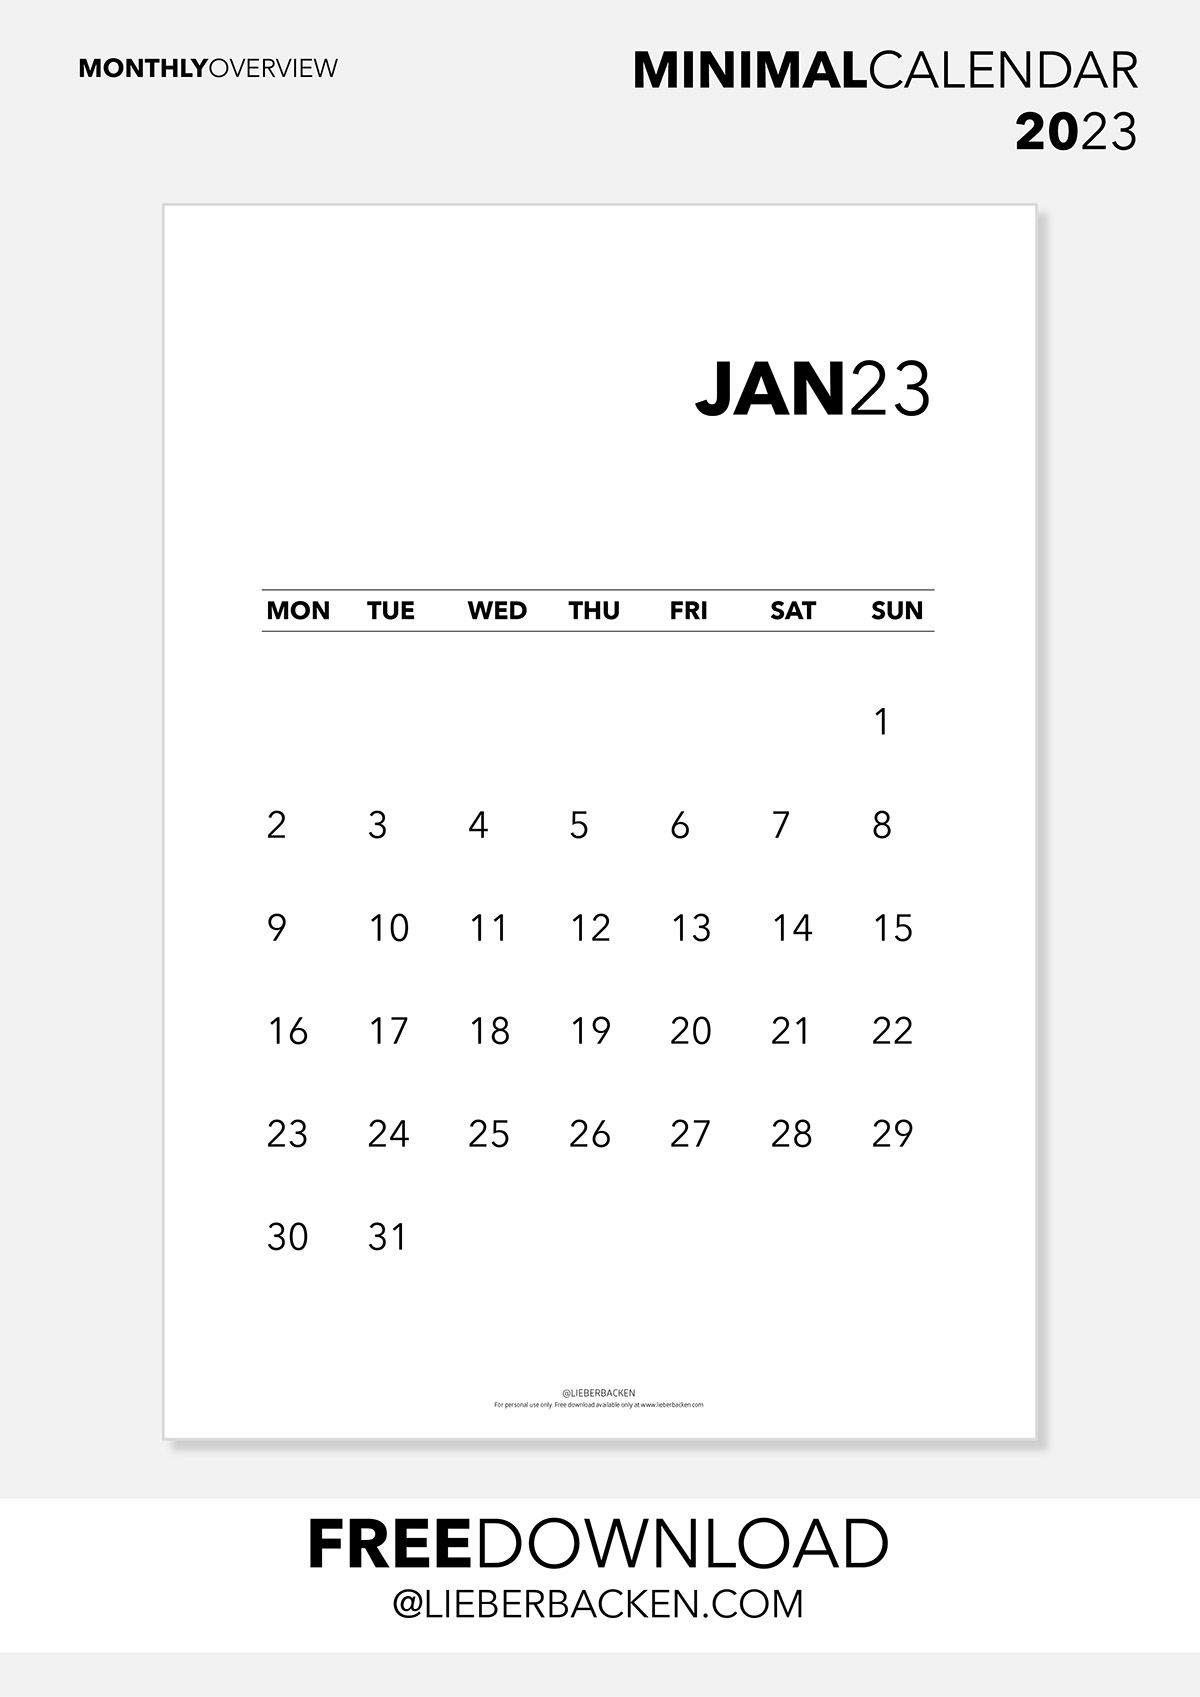 Minimal Calendar 2023 Monthly Overview - Free Download